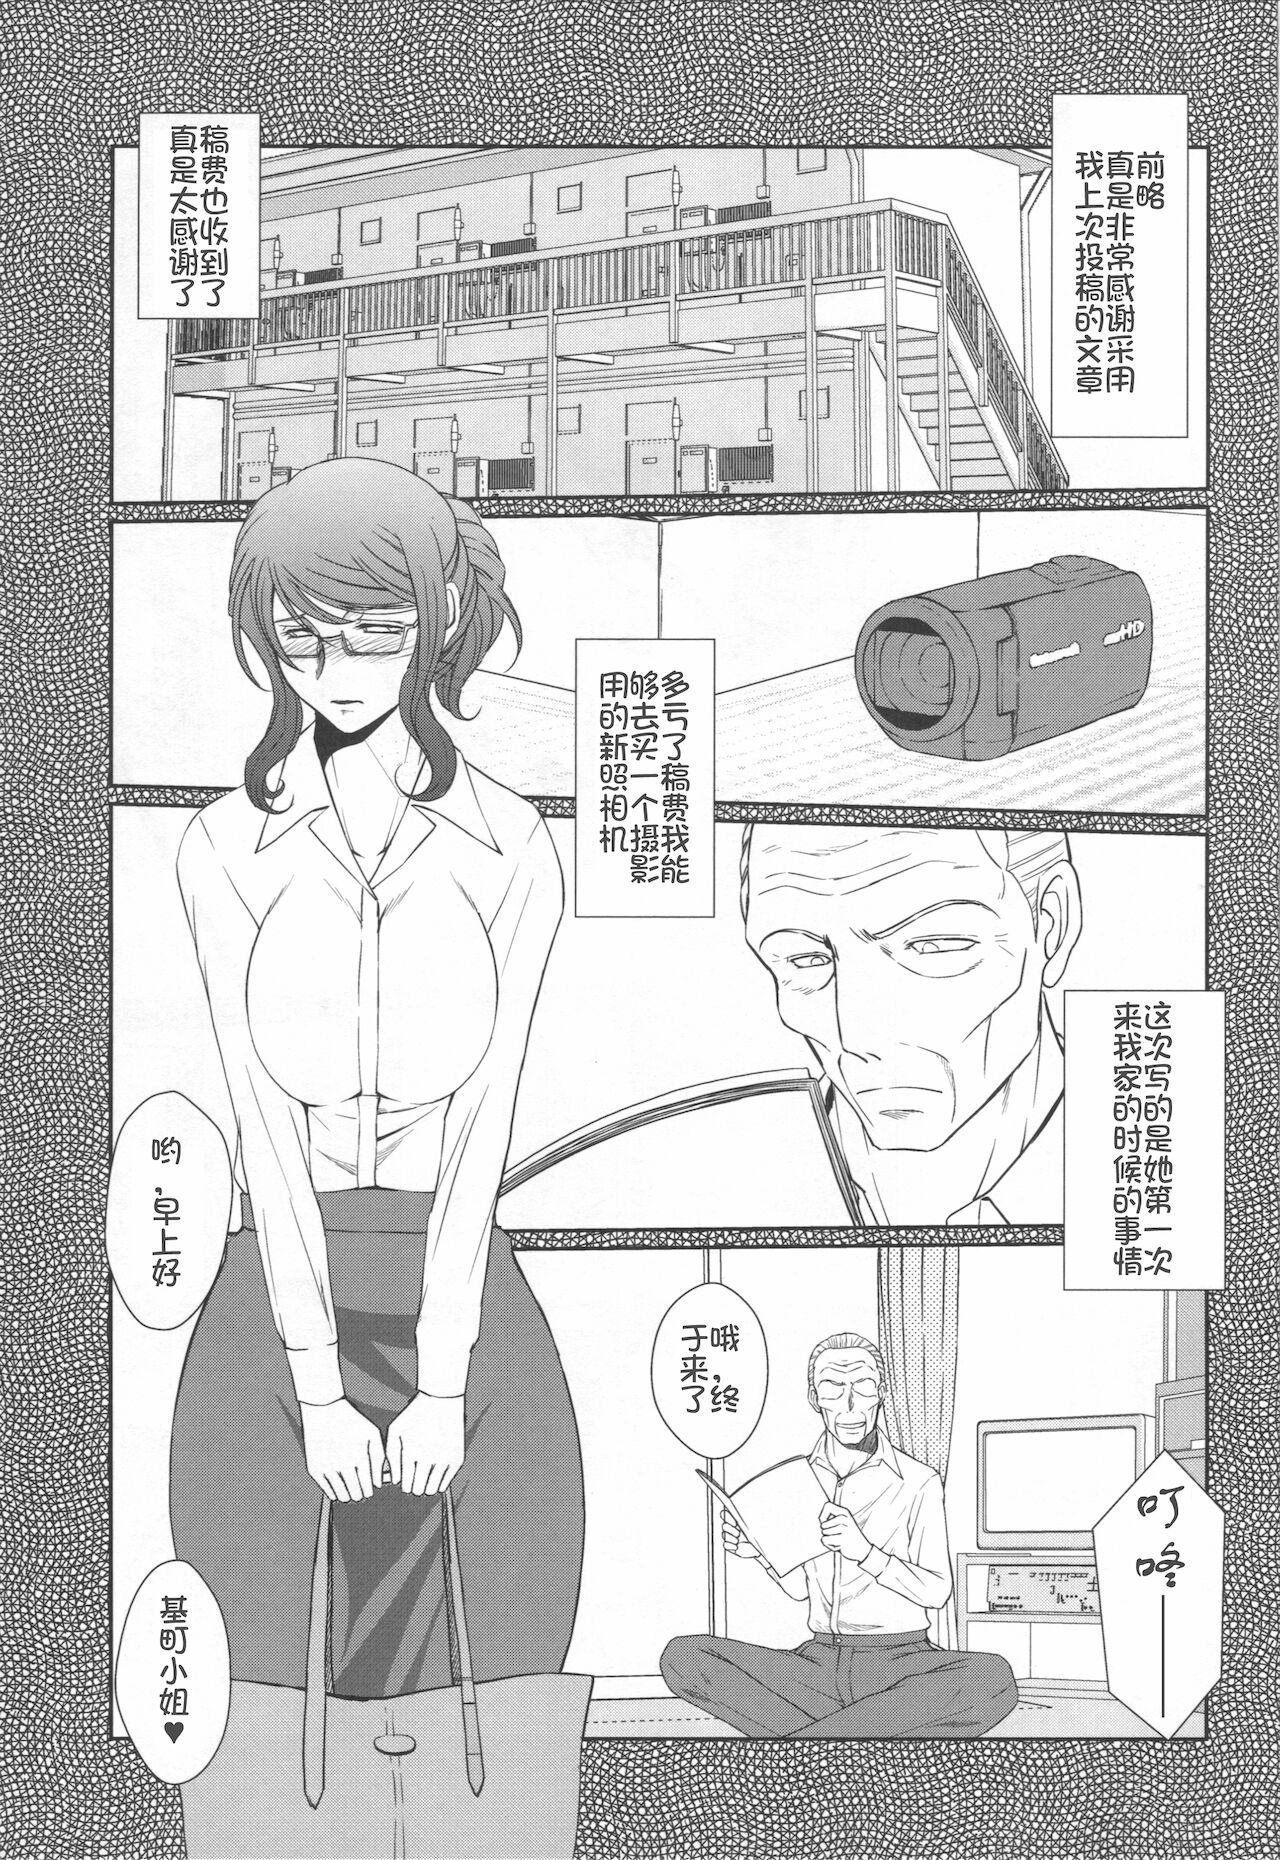 Office Zoku Akai Boushi no Onna - Woman with a red cap - Kyuujou lovers Bigtits - Page 3